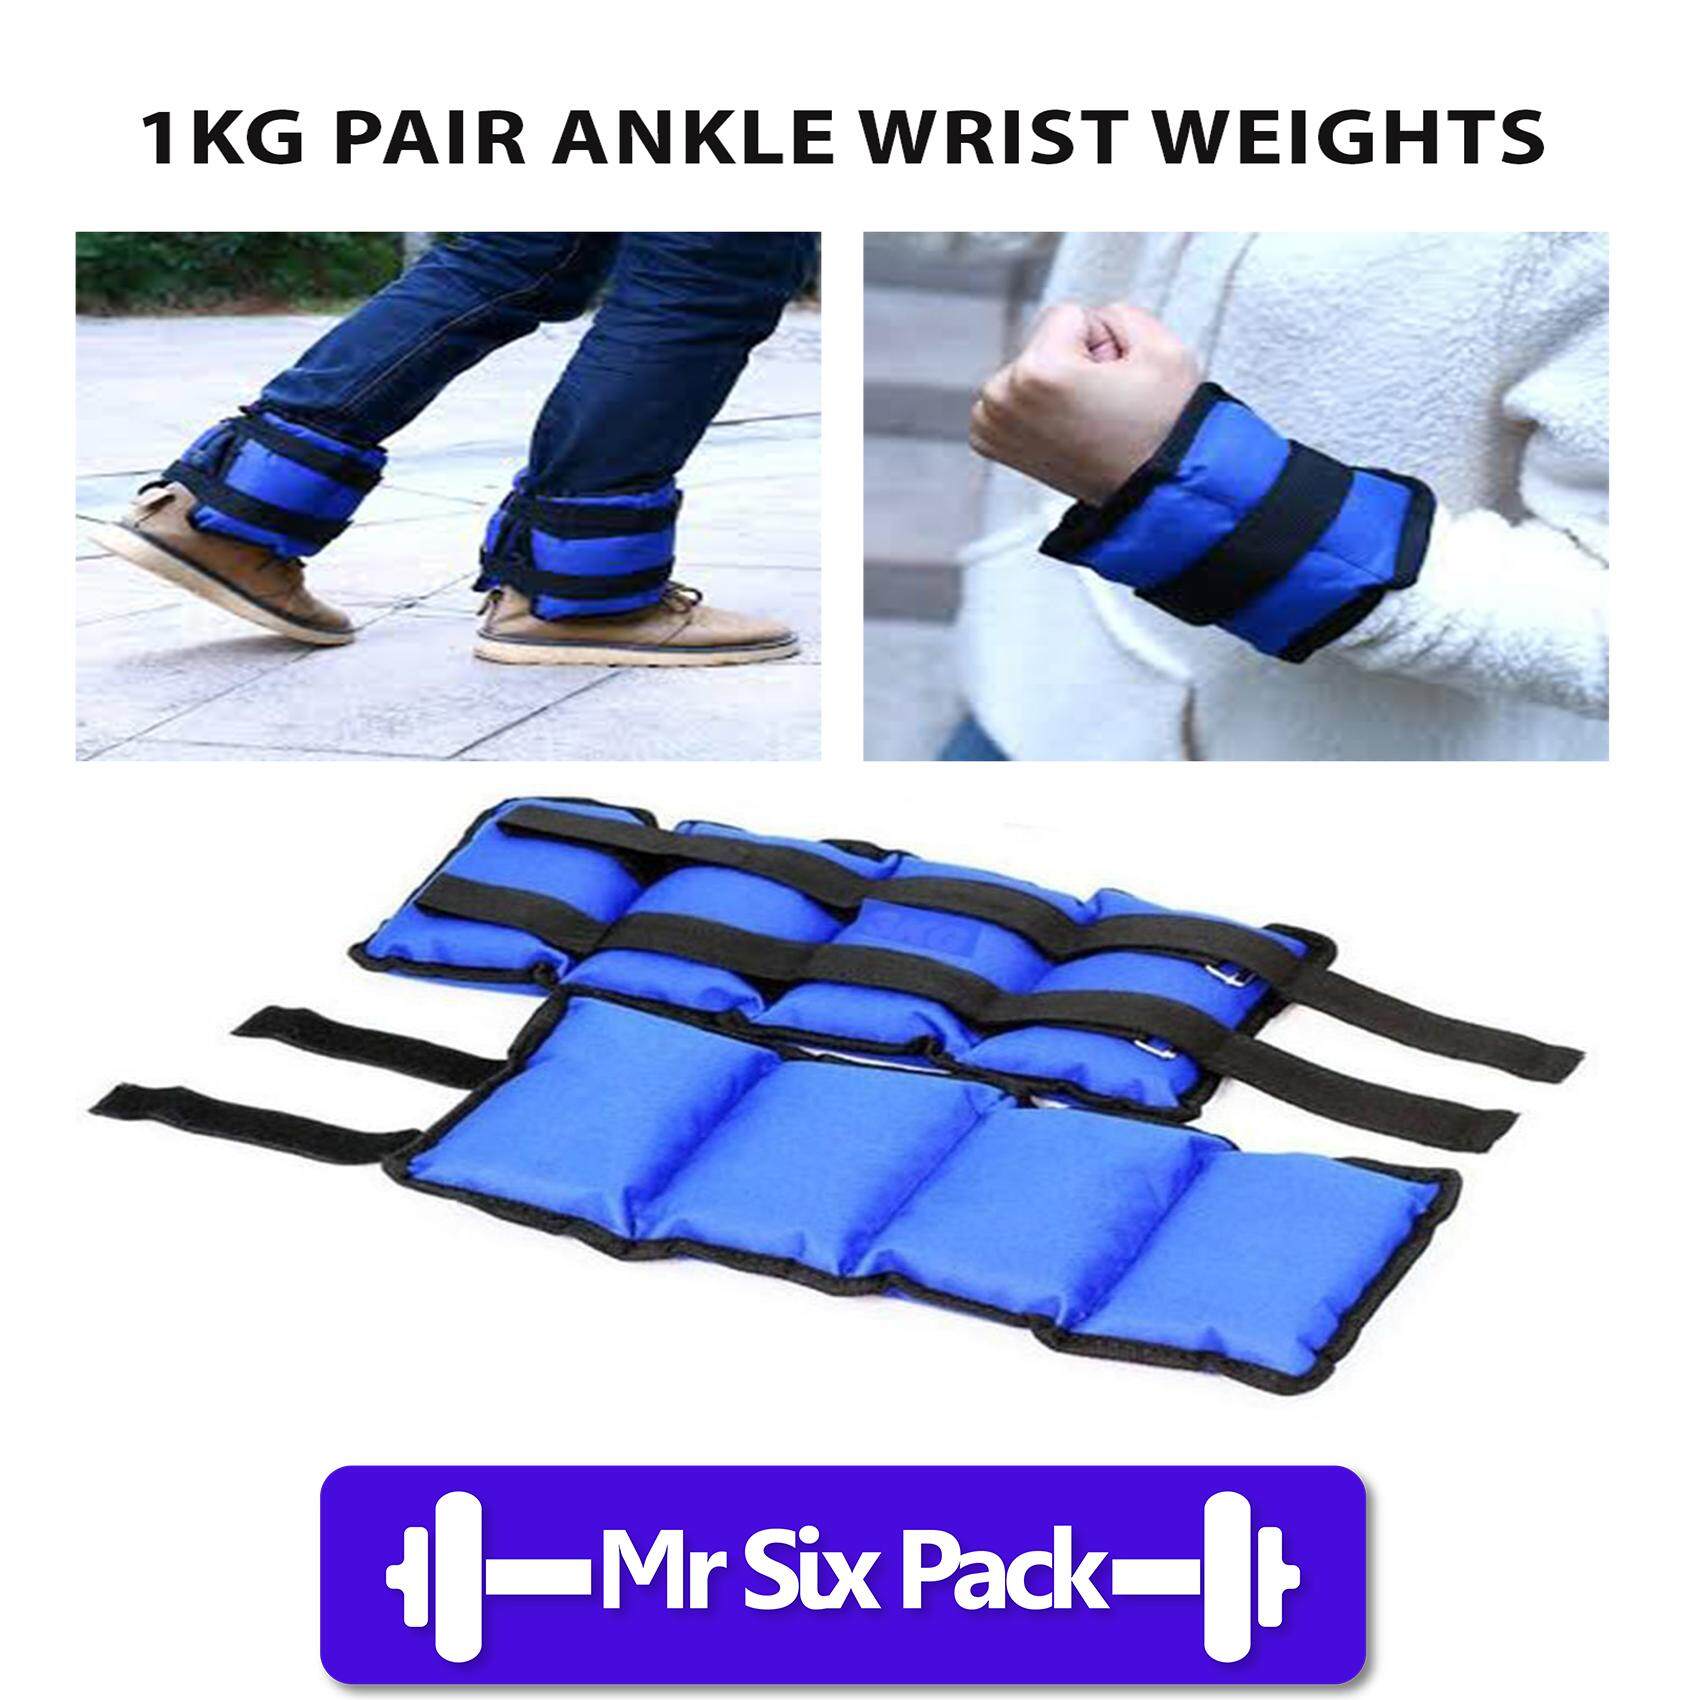 Ankle Weights Adjustable Leg Wrist Weight Strap Running Gym Training Exercise x2 